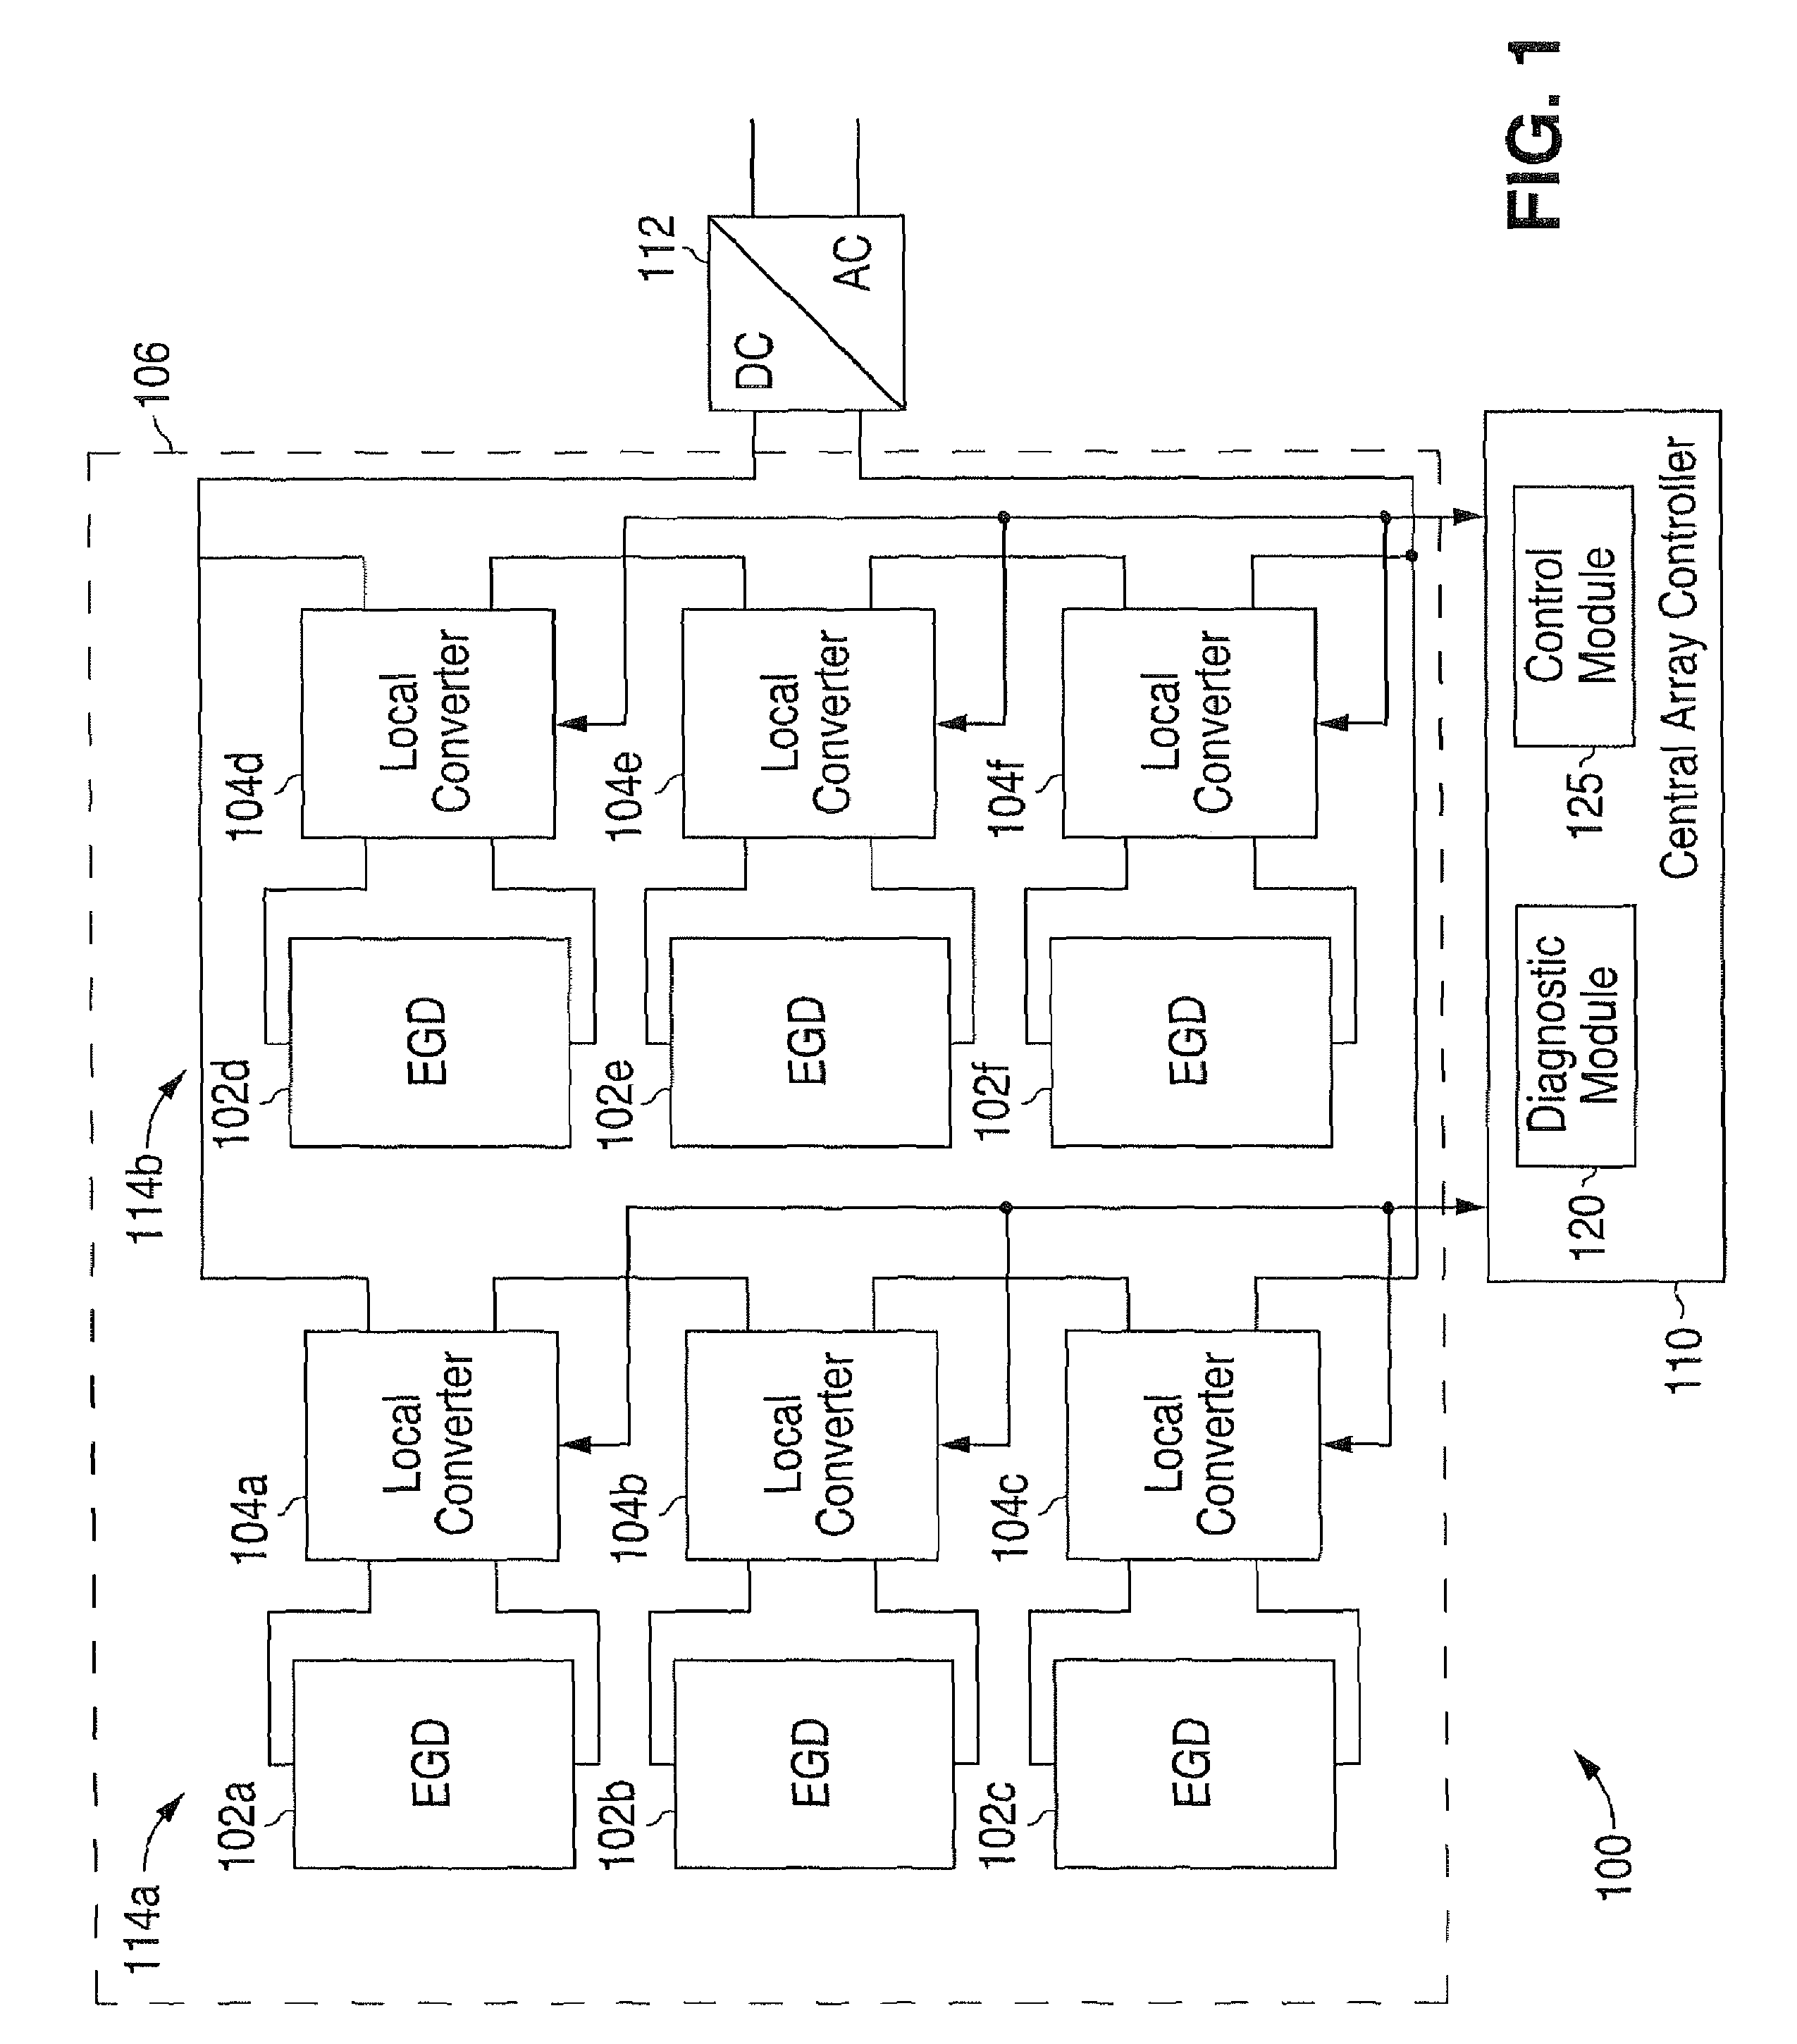 Method and system for providing local converters to provide maximum power point tracking in an energy generating system